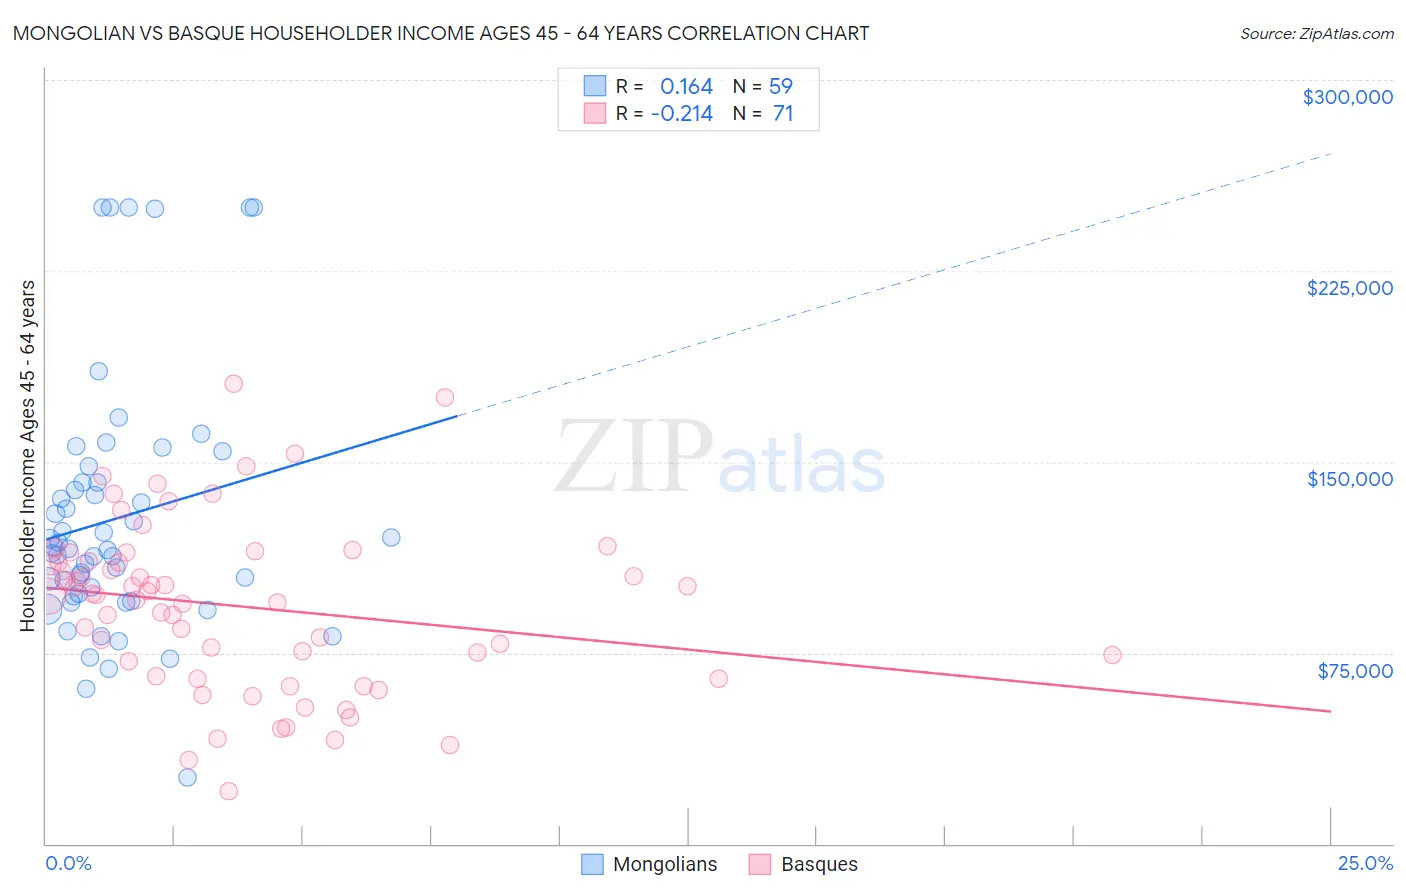 Mongolian vs Basque Householder Income Ages 45 - 64 years